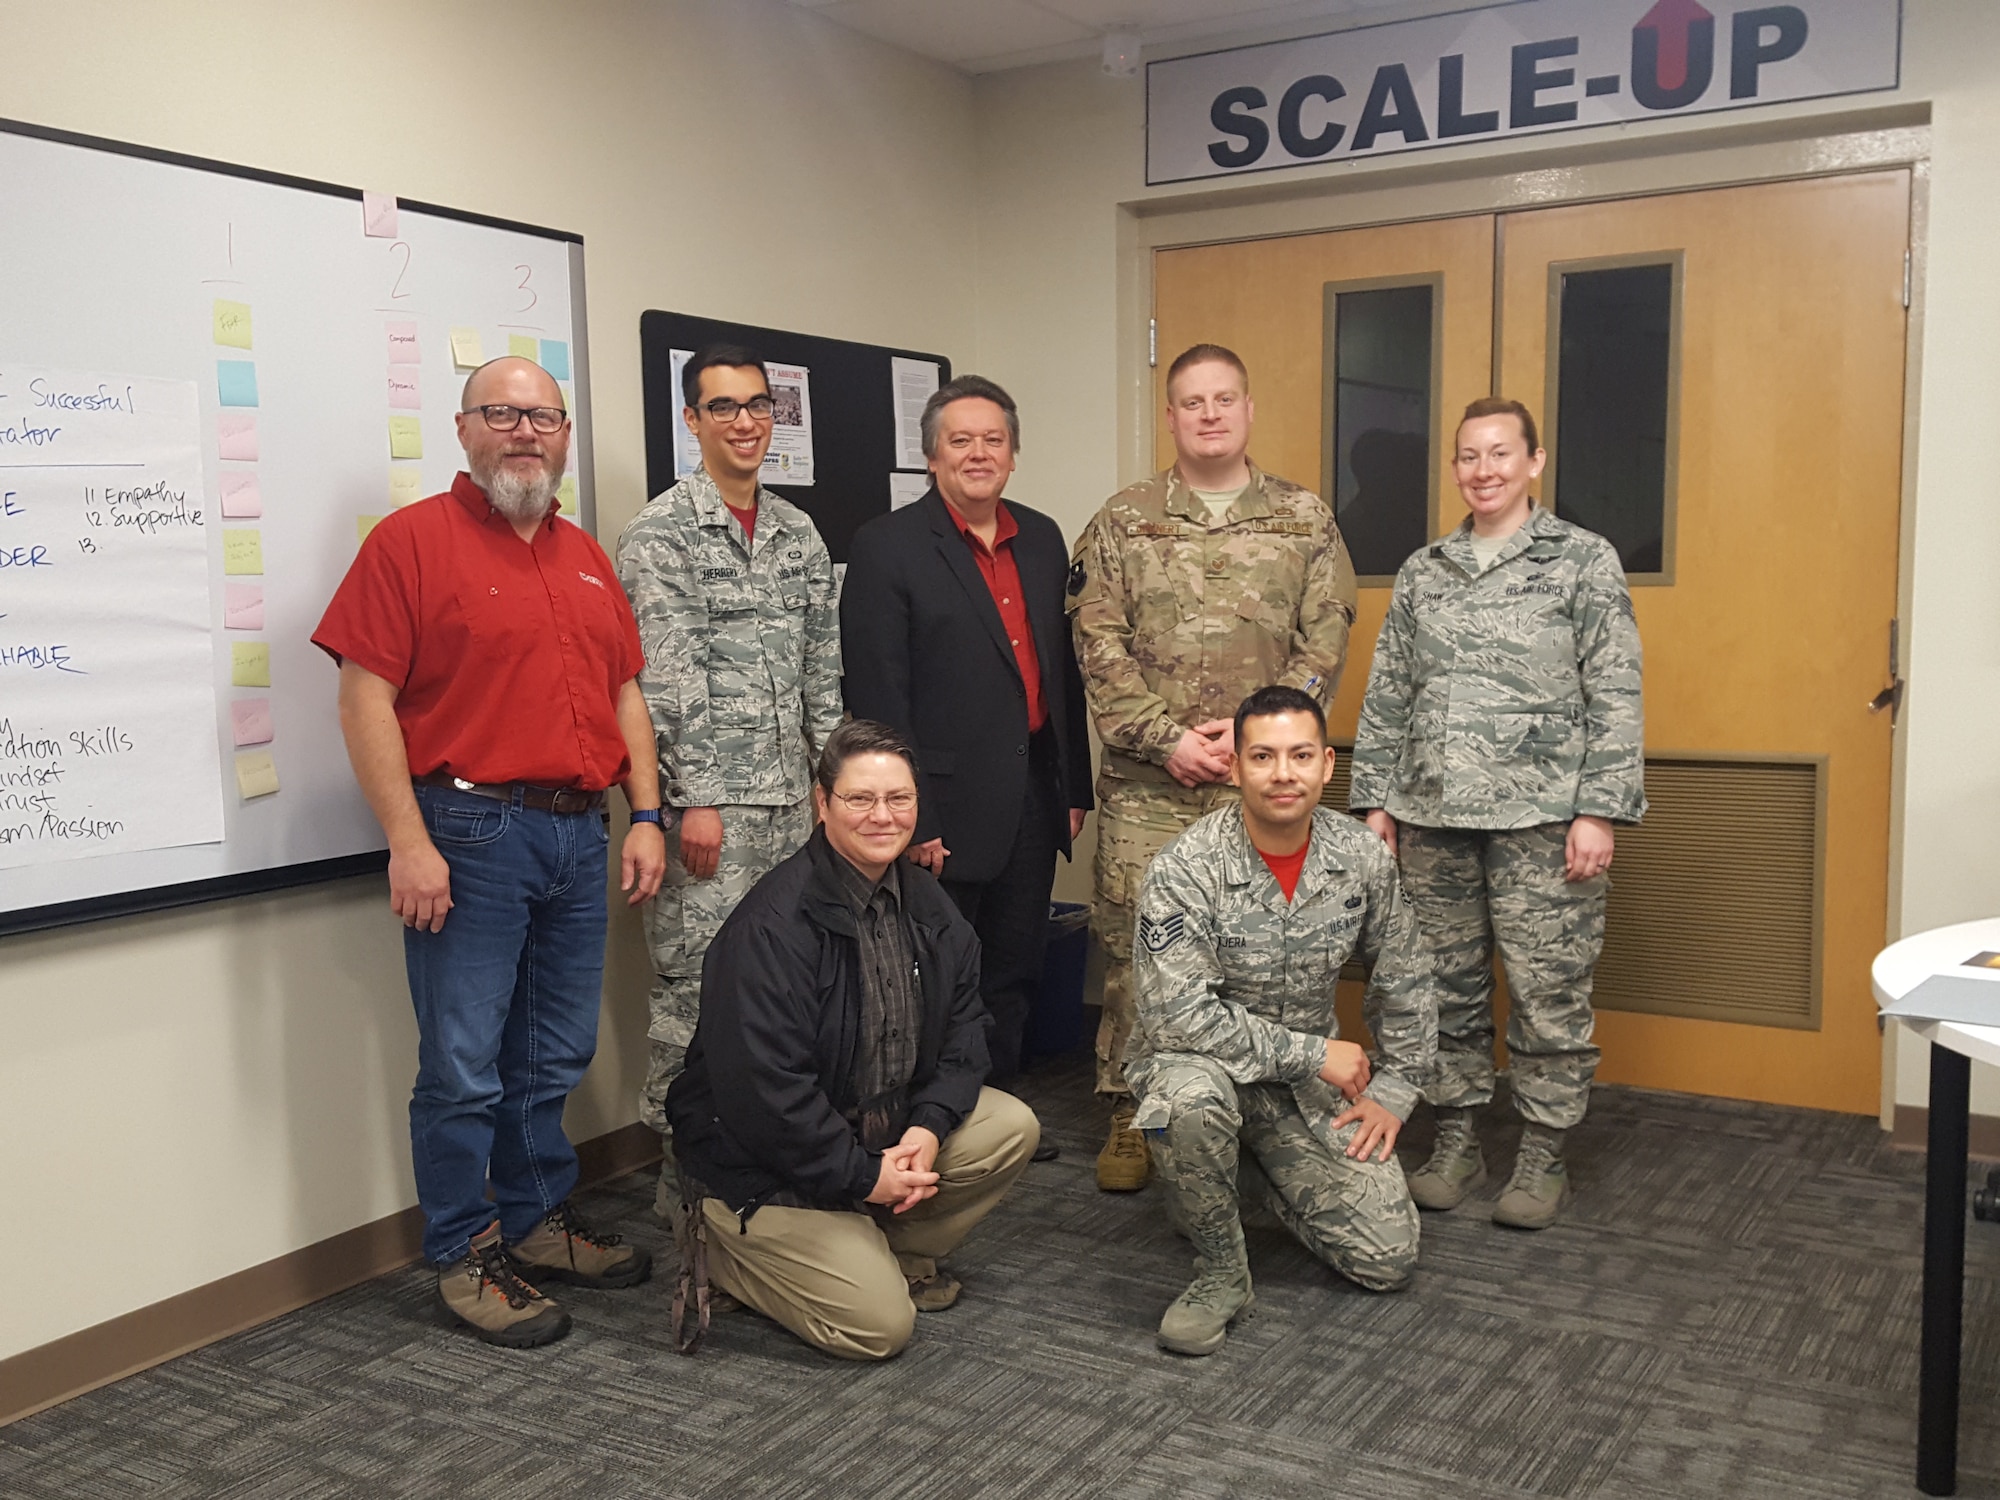 Enhanced Learning & Instructional Techniques Enrichment course graduates pose for a picture at Keesler Air Force Base, Mississippi, Feb. 1, 2019. Seven instructors have participated in the first small group tryout ELITE course, which is a five-day course focused on exposing attendees to the basics of student-centered active learning concepts and methodologies. This is the latest curriculum development initiative by the 81st Training Group aimed at creating instructors who are better prepared to train Mach-21 Airmen.  (Courtesy photo)